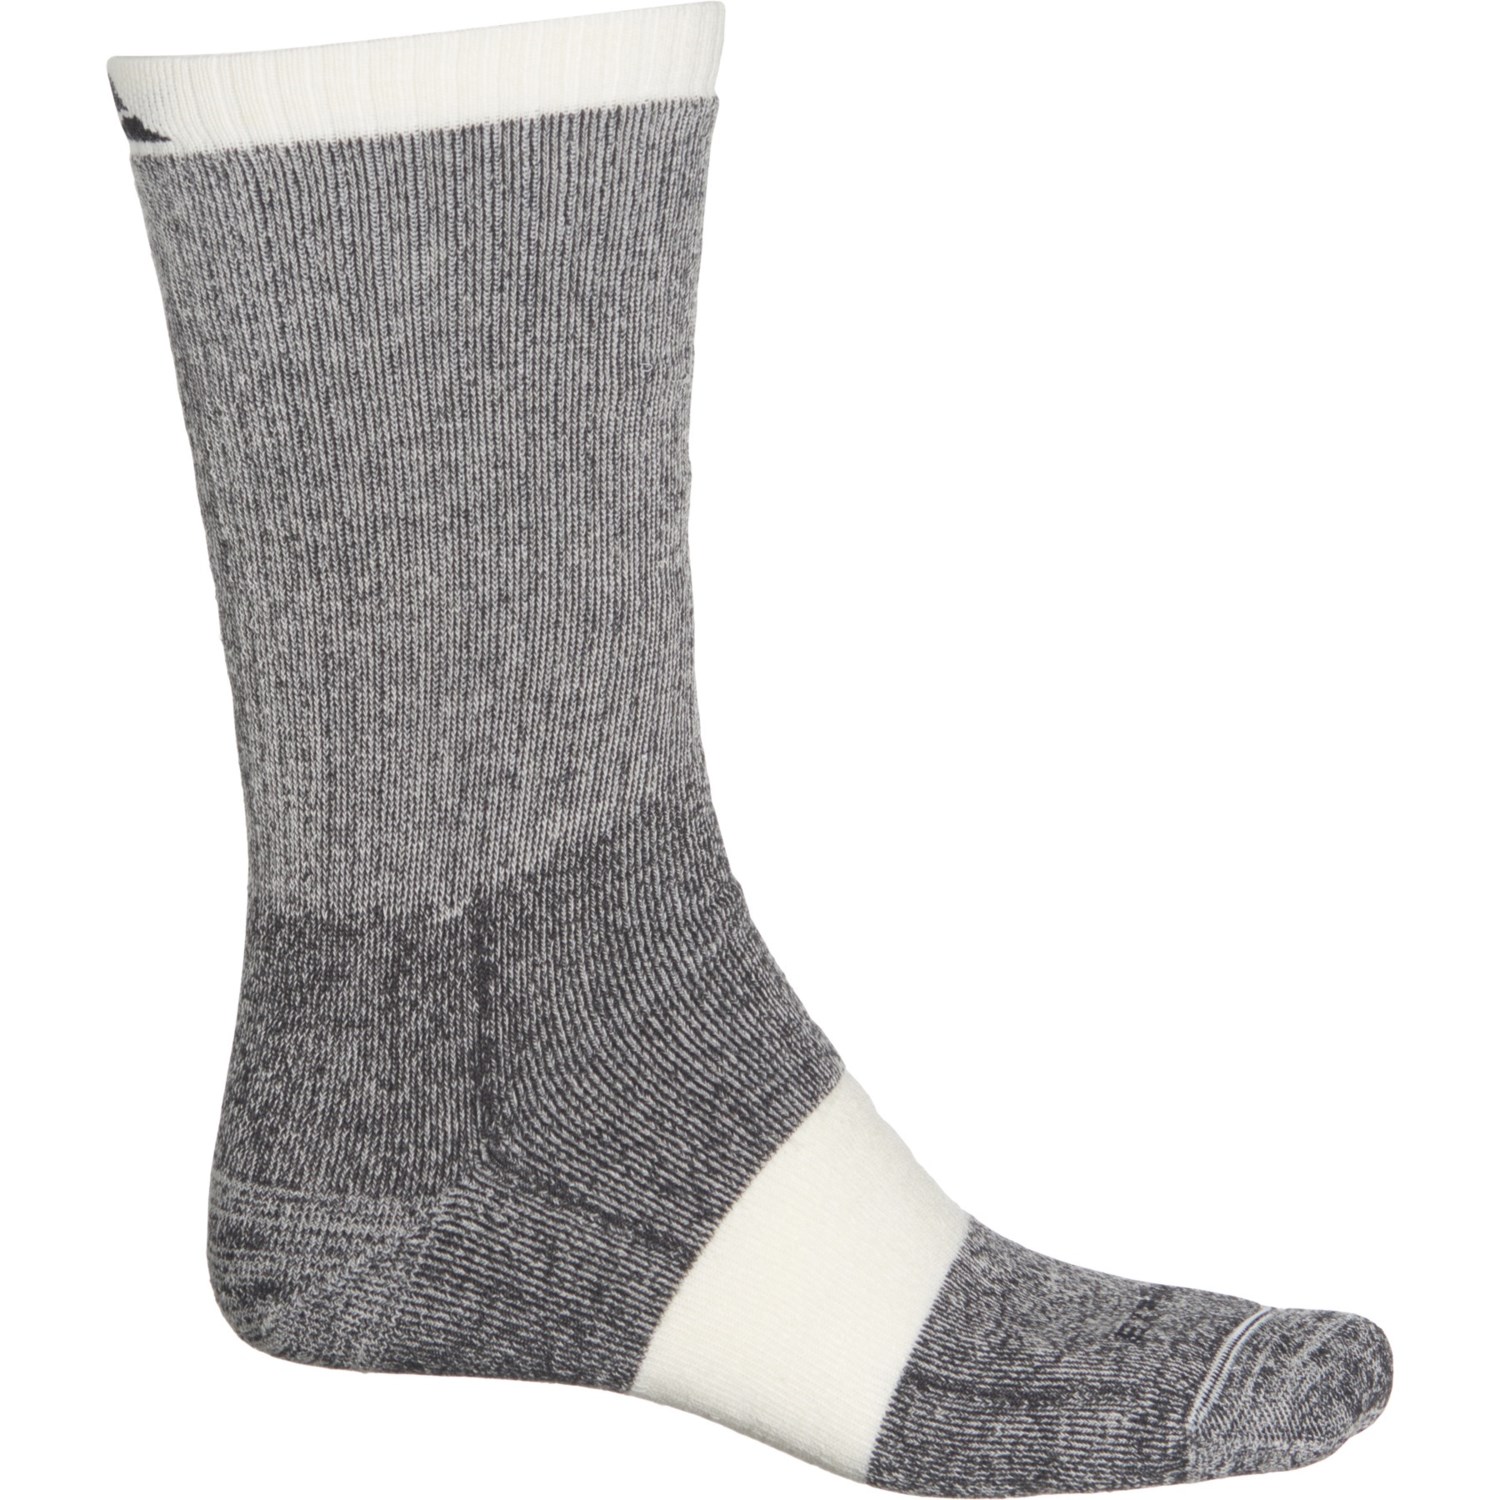 Cabot & Sons All-Weather Hiking Boot Socks - Merino Wool, Crew (For Men)